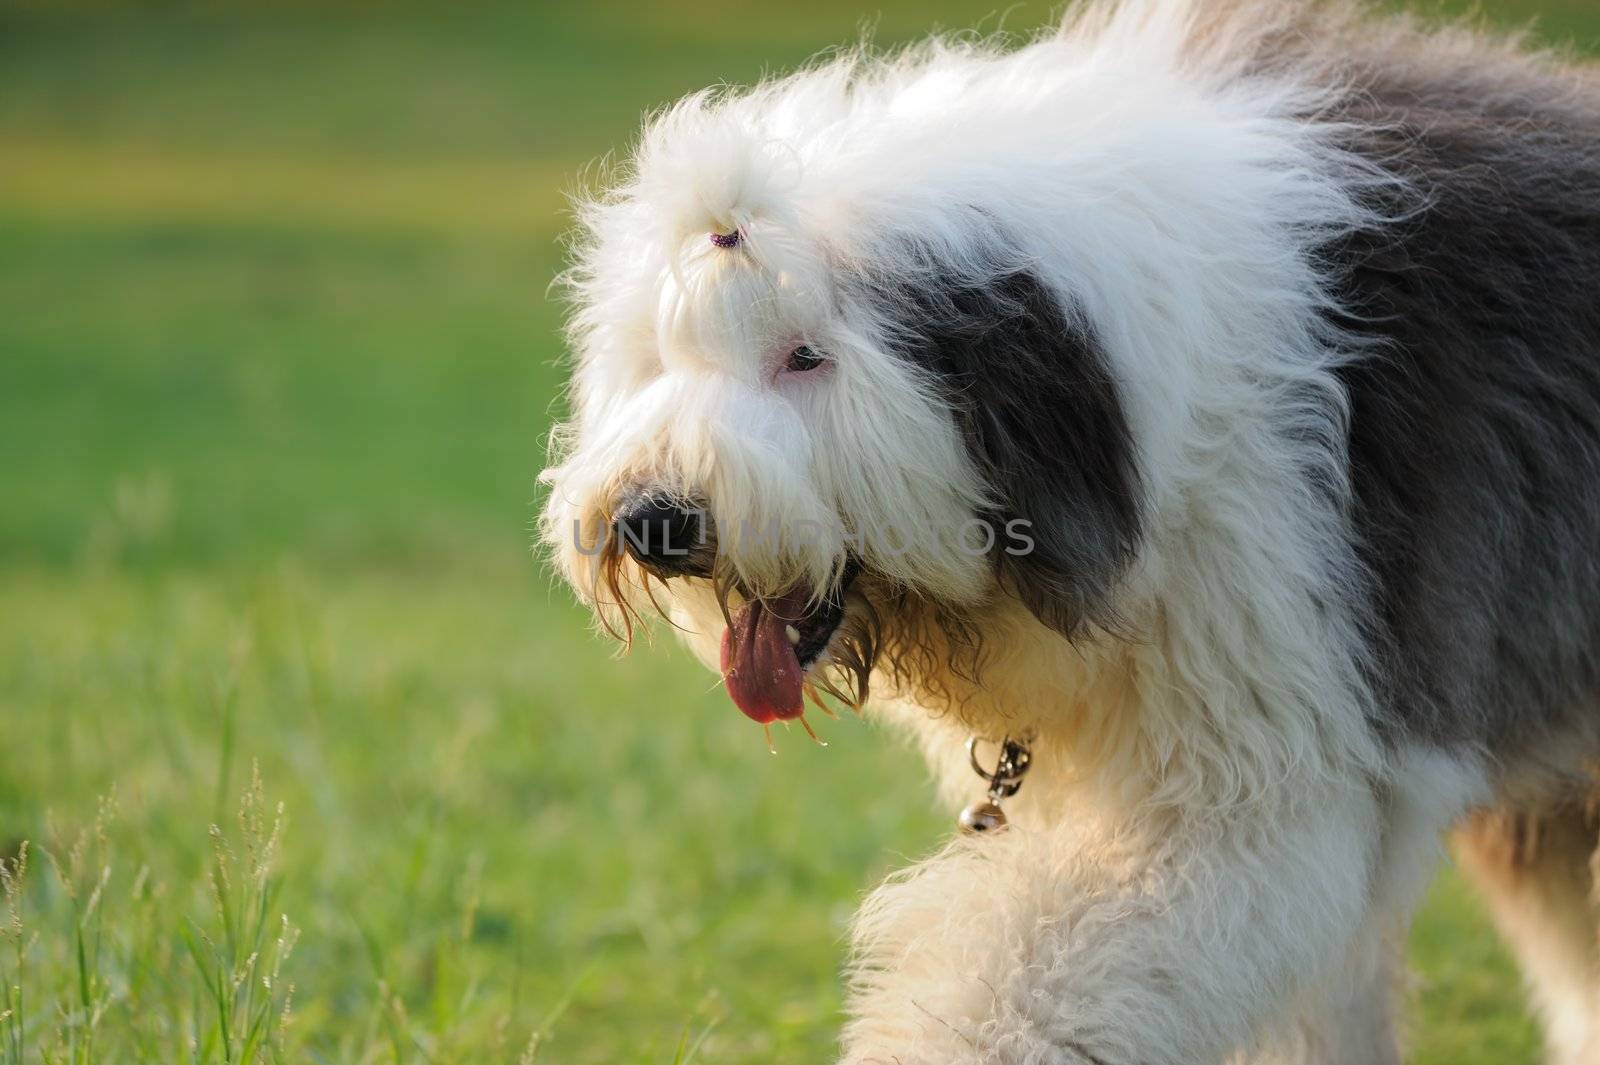 An old English sheepdog walking on the lawn